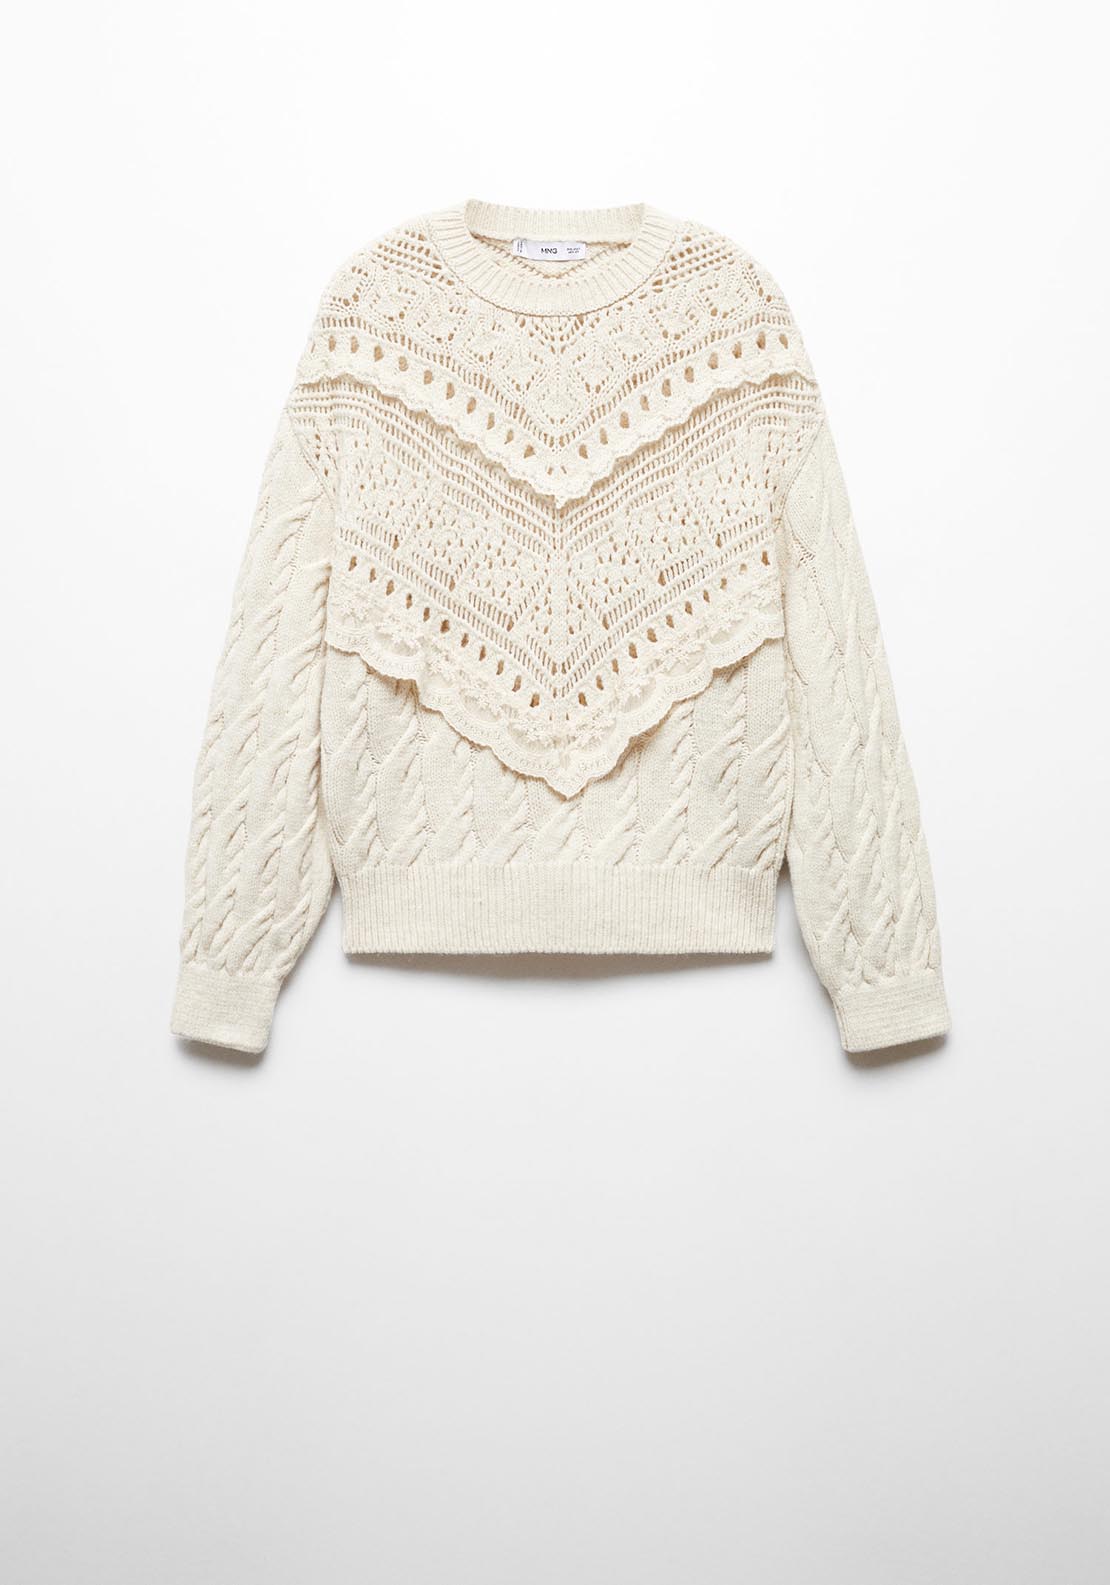 Mango Knitted sweater with openwork details 8 Shaws Department Stores